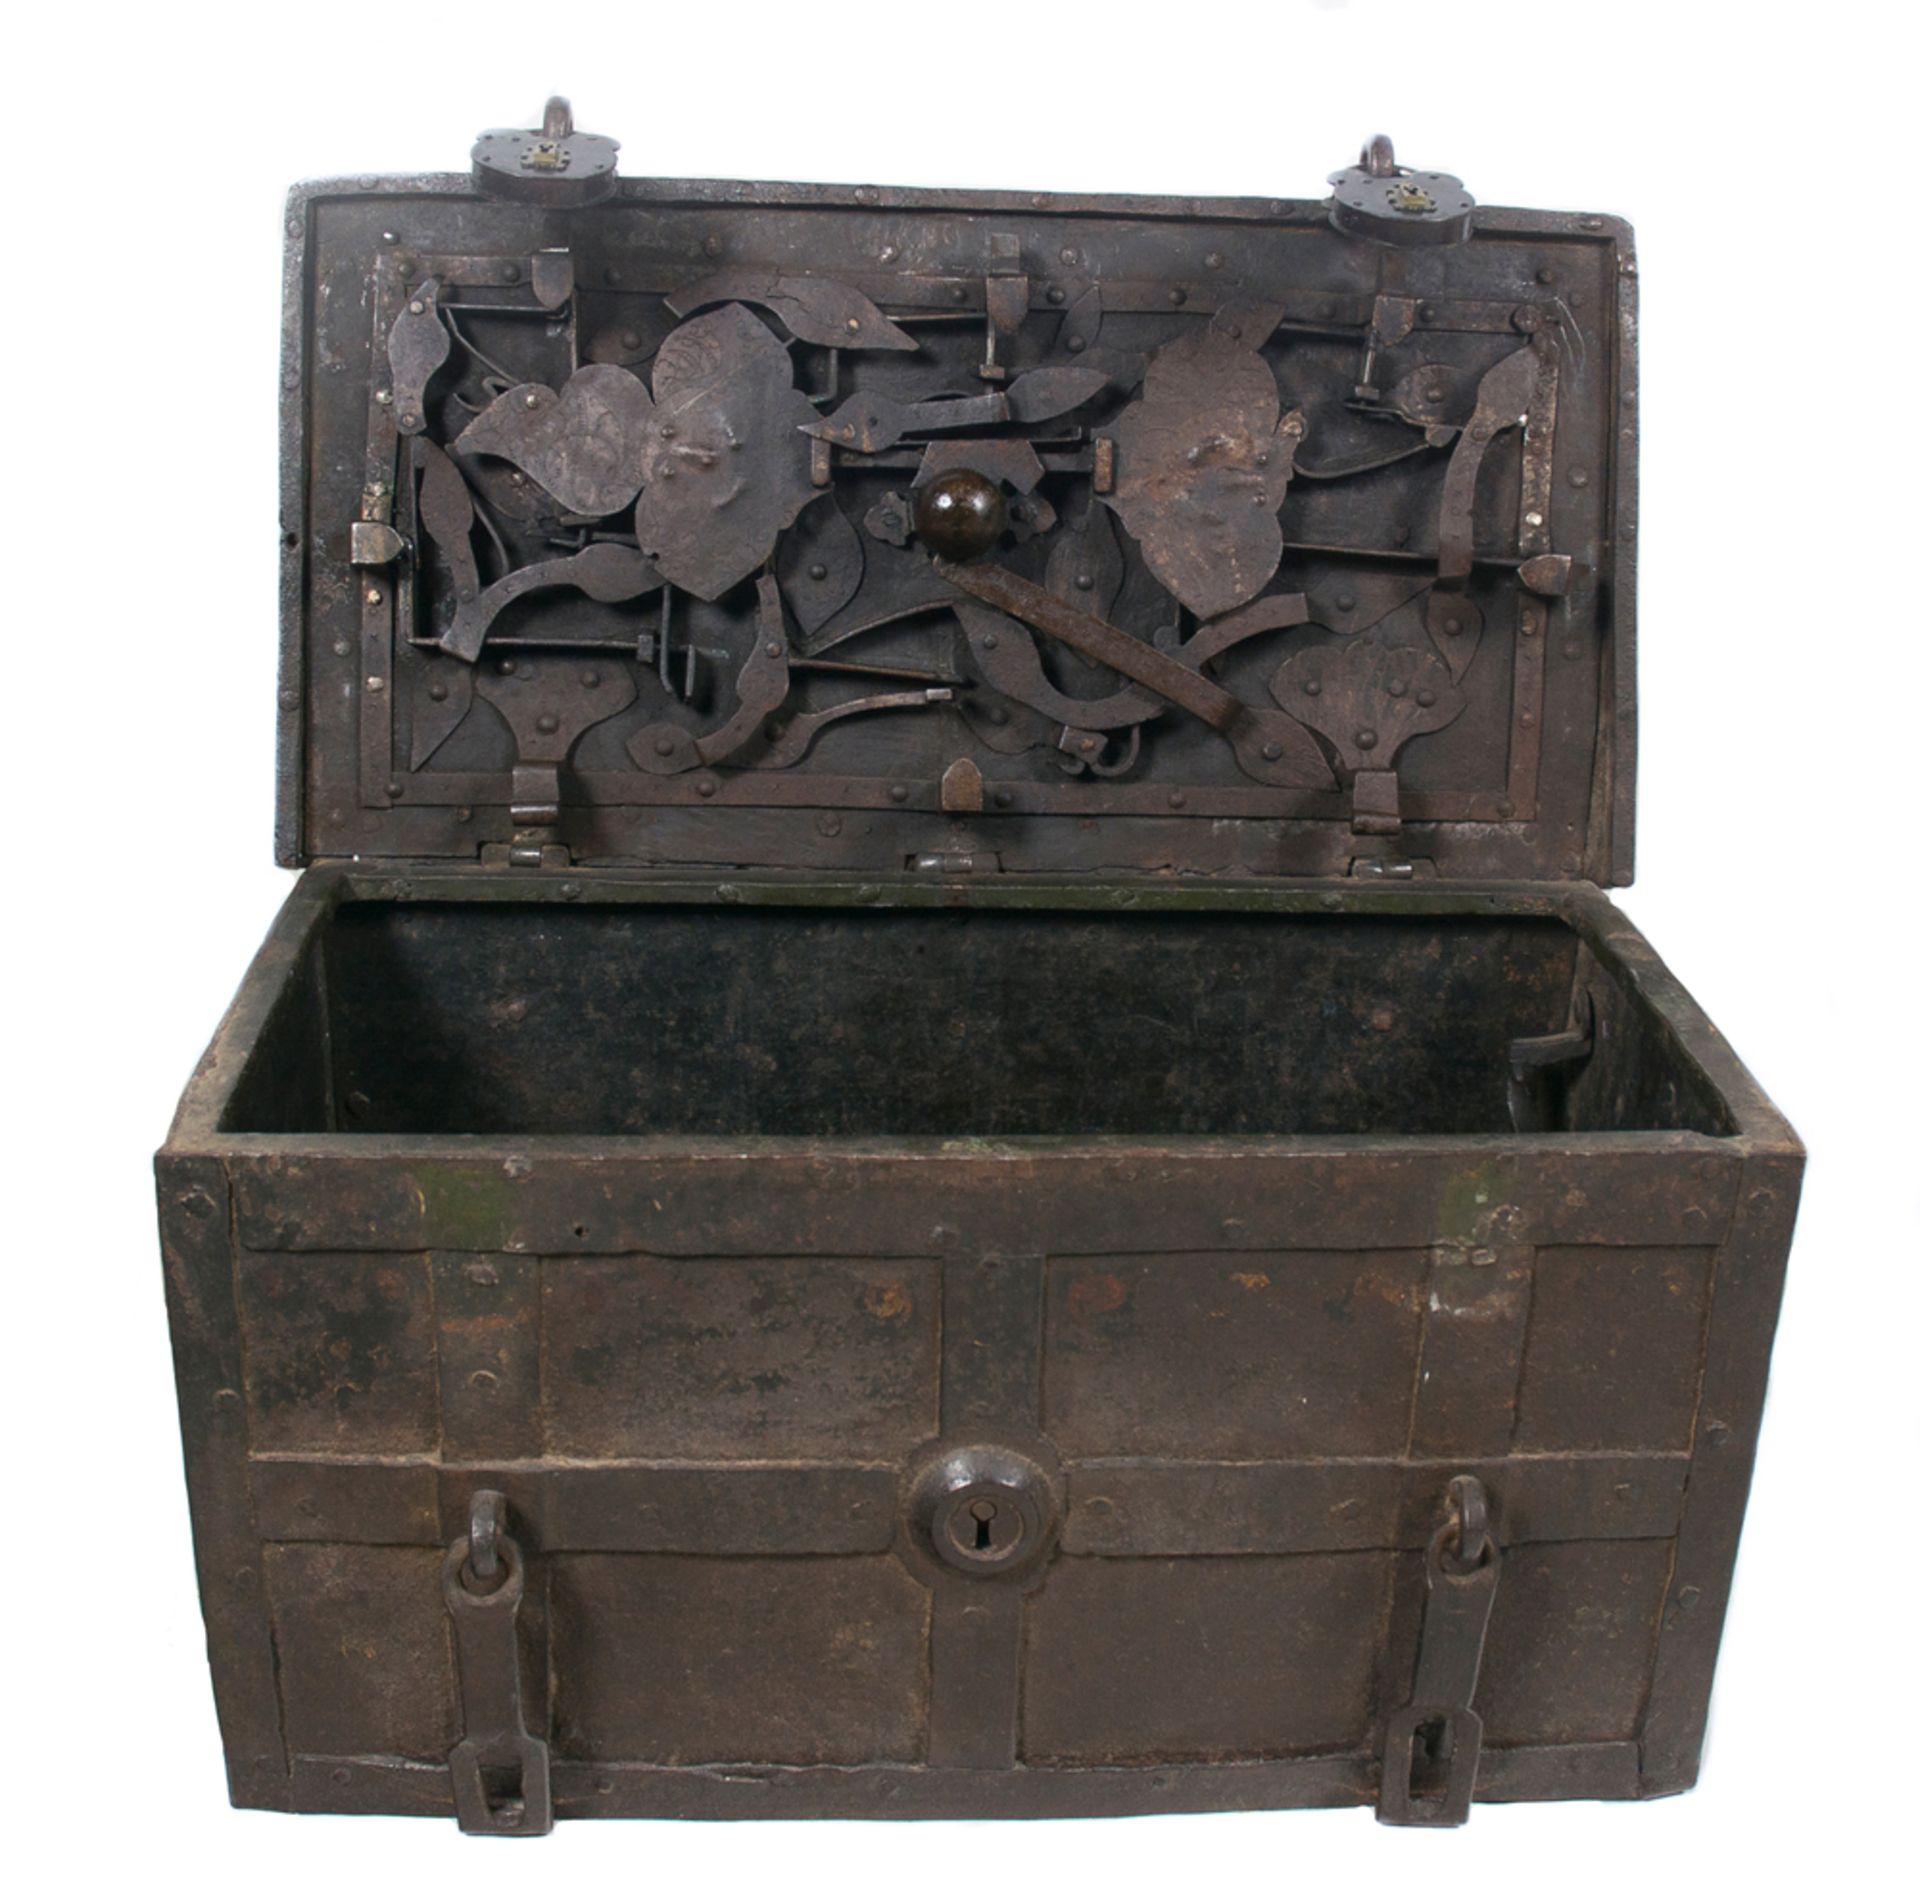 Wrought iron strong box. Nuremberg or Augsburg. Late 16th century. - Image 2 of 6